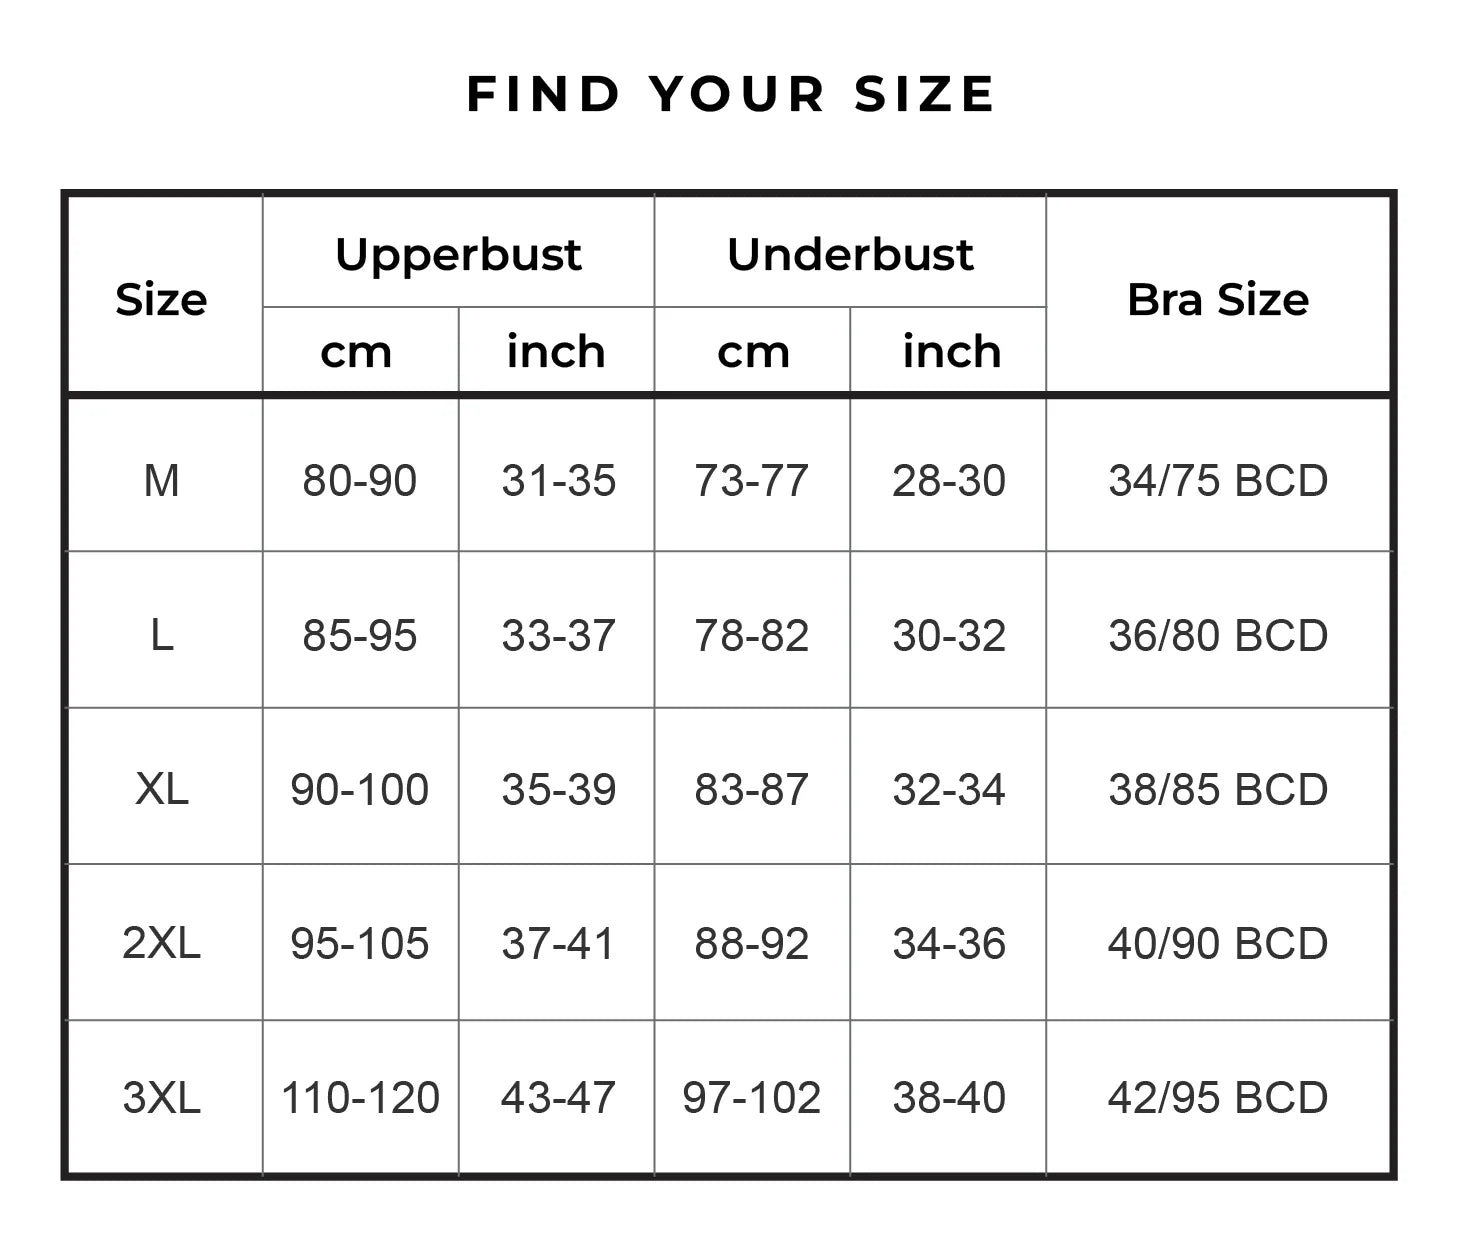 Find your perfect fit with Chantelle's Secret Seamless Bra Size Guide, detailing upperbust and underbust measurements in both centimeters and inches for sizes M to 3XL to ensure you select the right size for maximum comfort and support.